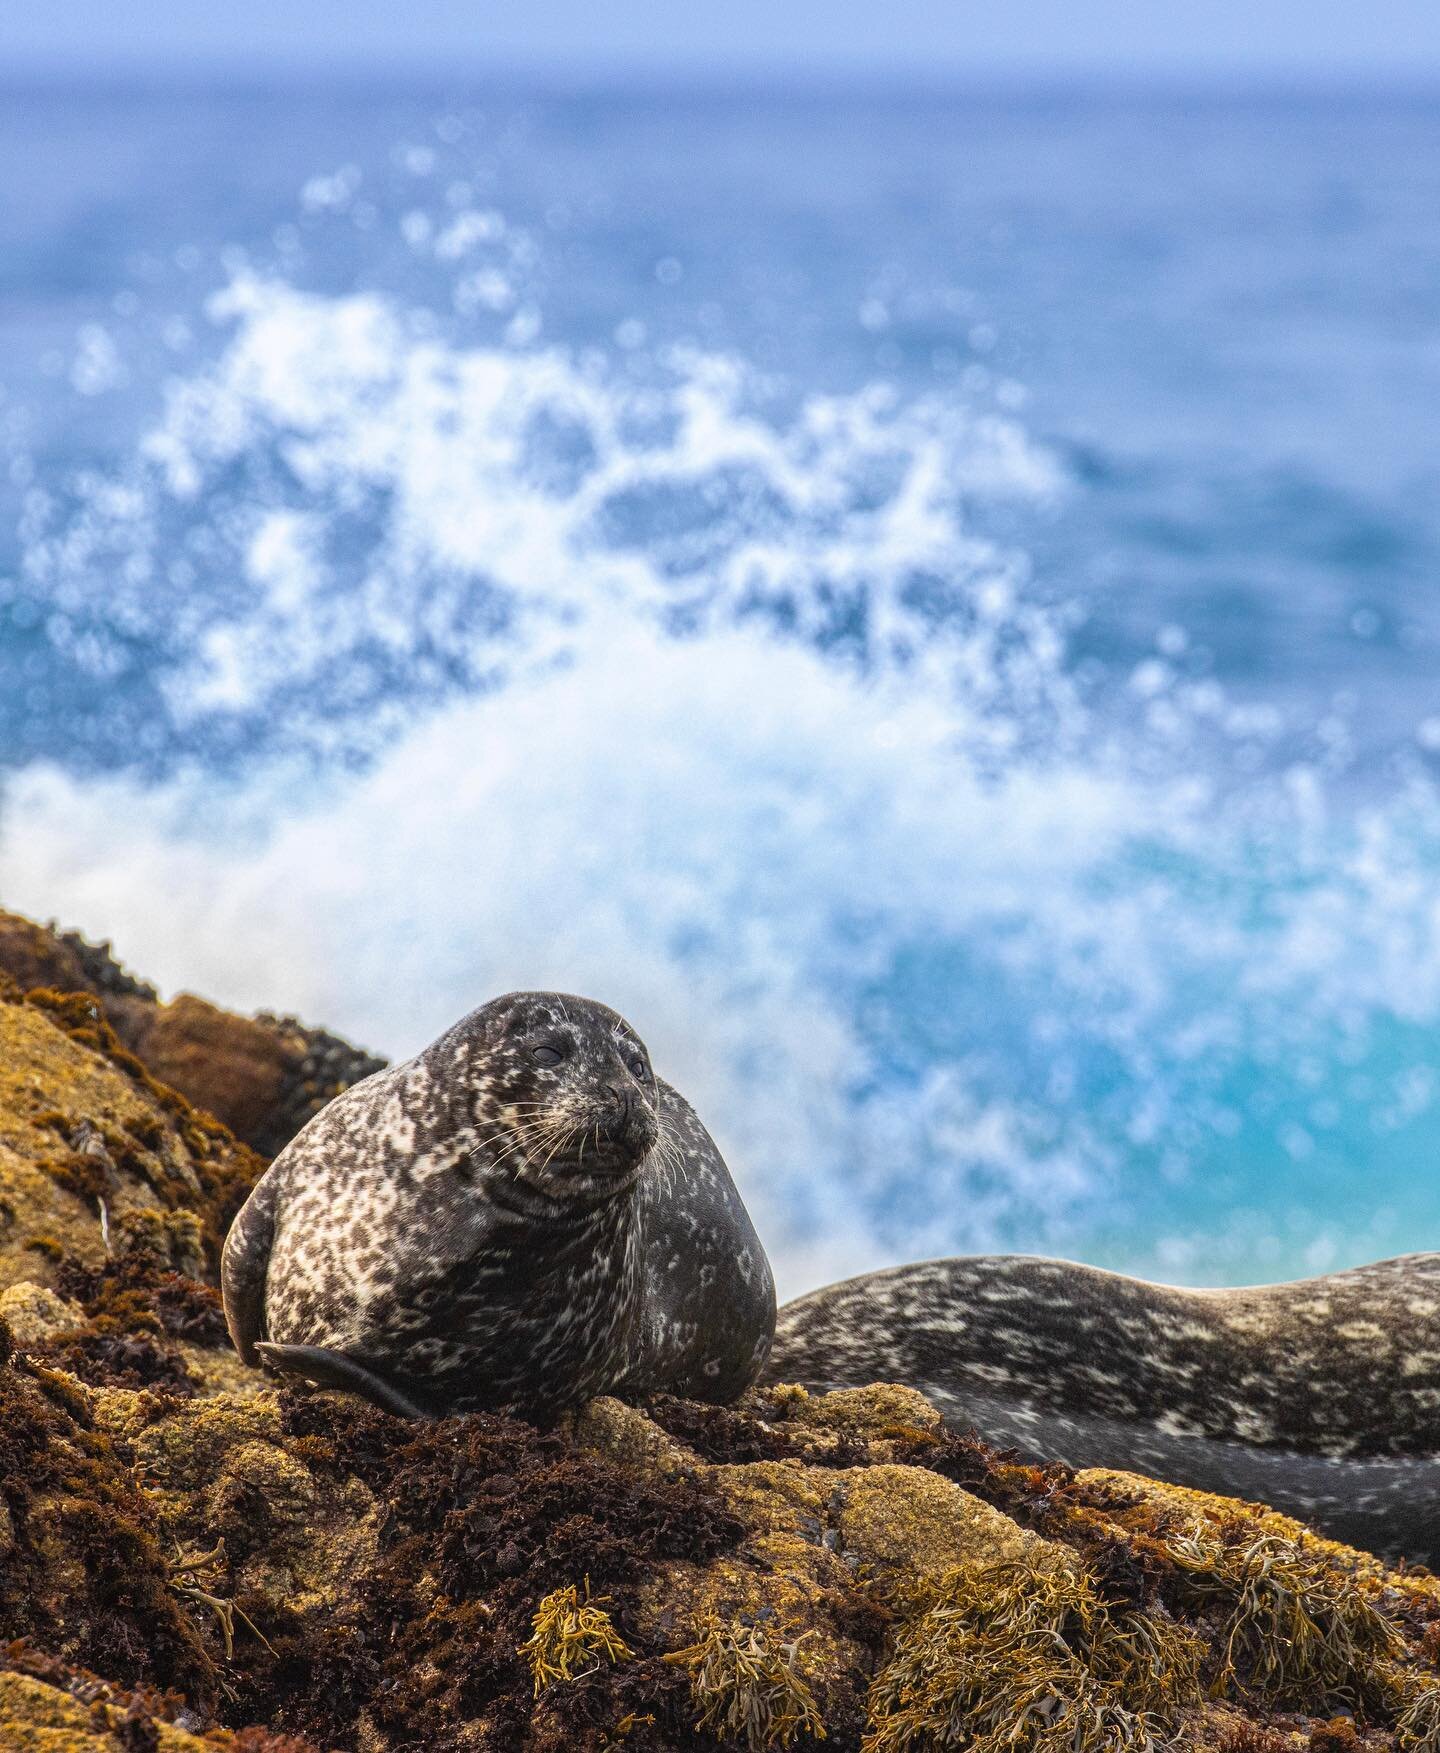 Here in Monterey Bay, CA, we are lucky to have a year-round resident population of Harbor Seals! Harbor Seals can be found swimming and hunting amongst the kelp forest, or &ldquo;hauled out&rdquo; like this one here. Harbor Seals haul out to rest, of